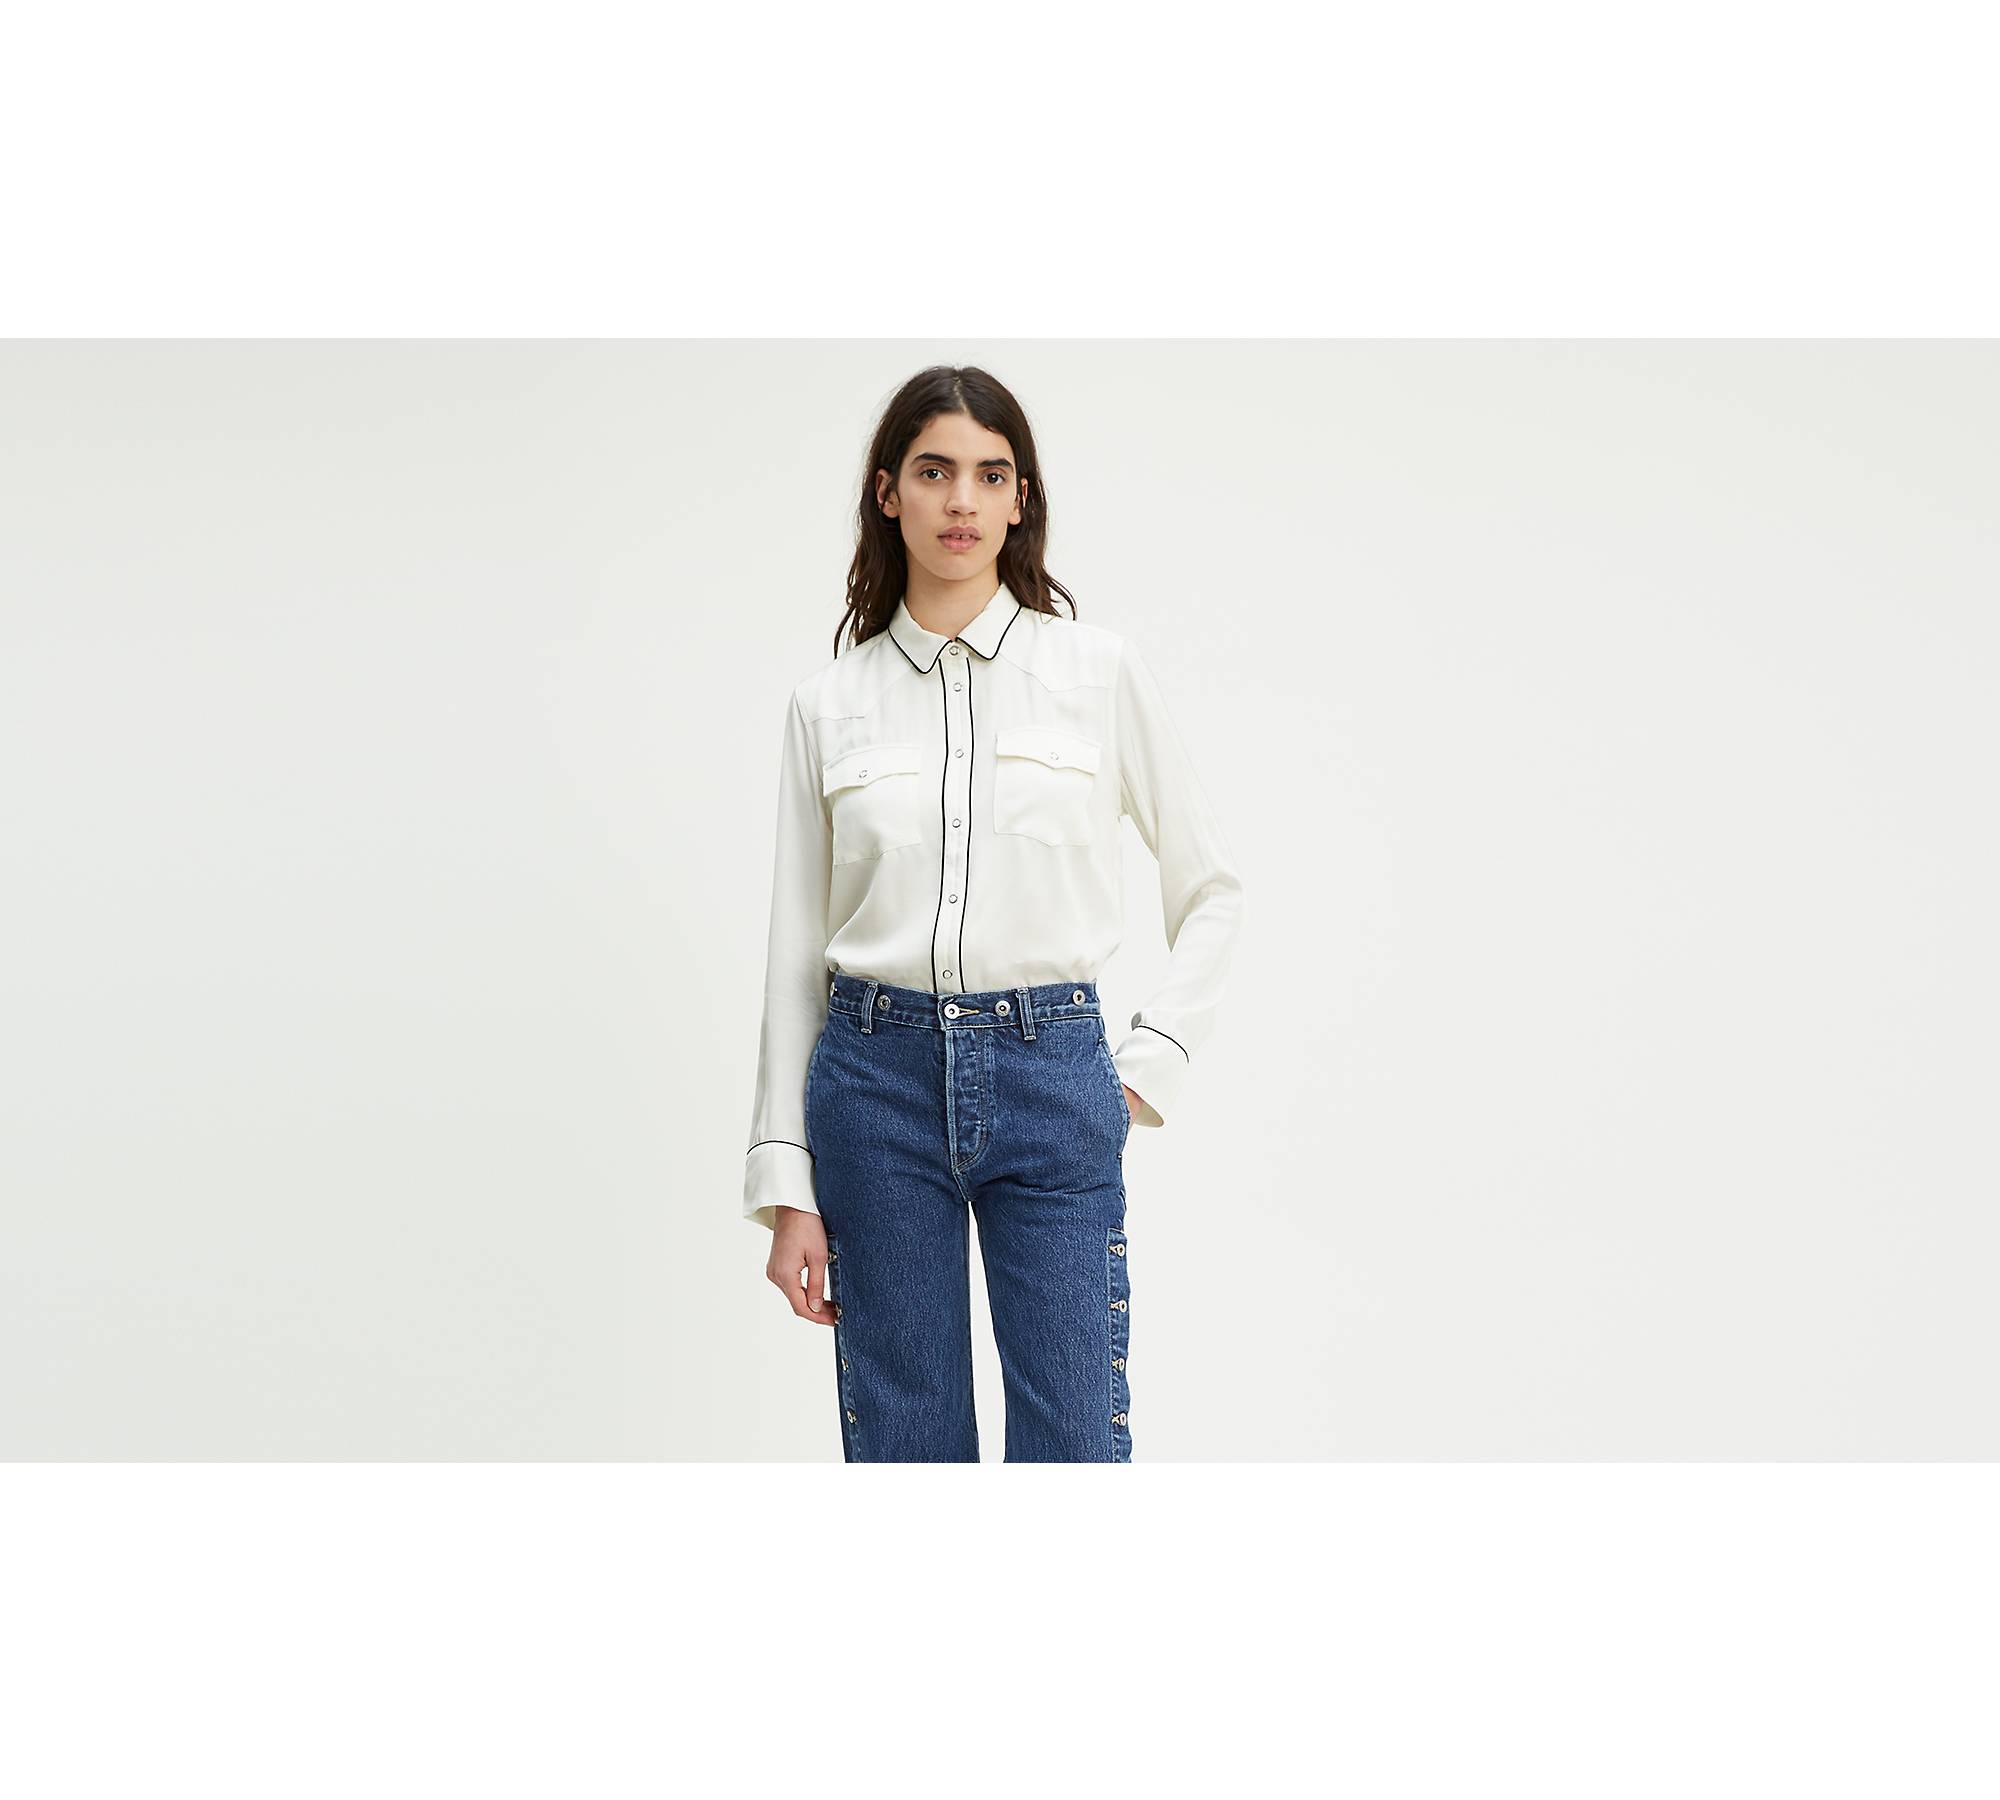 Western Smiley Top - White | Levi's® US